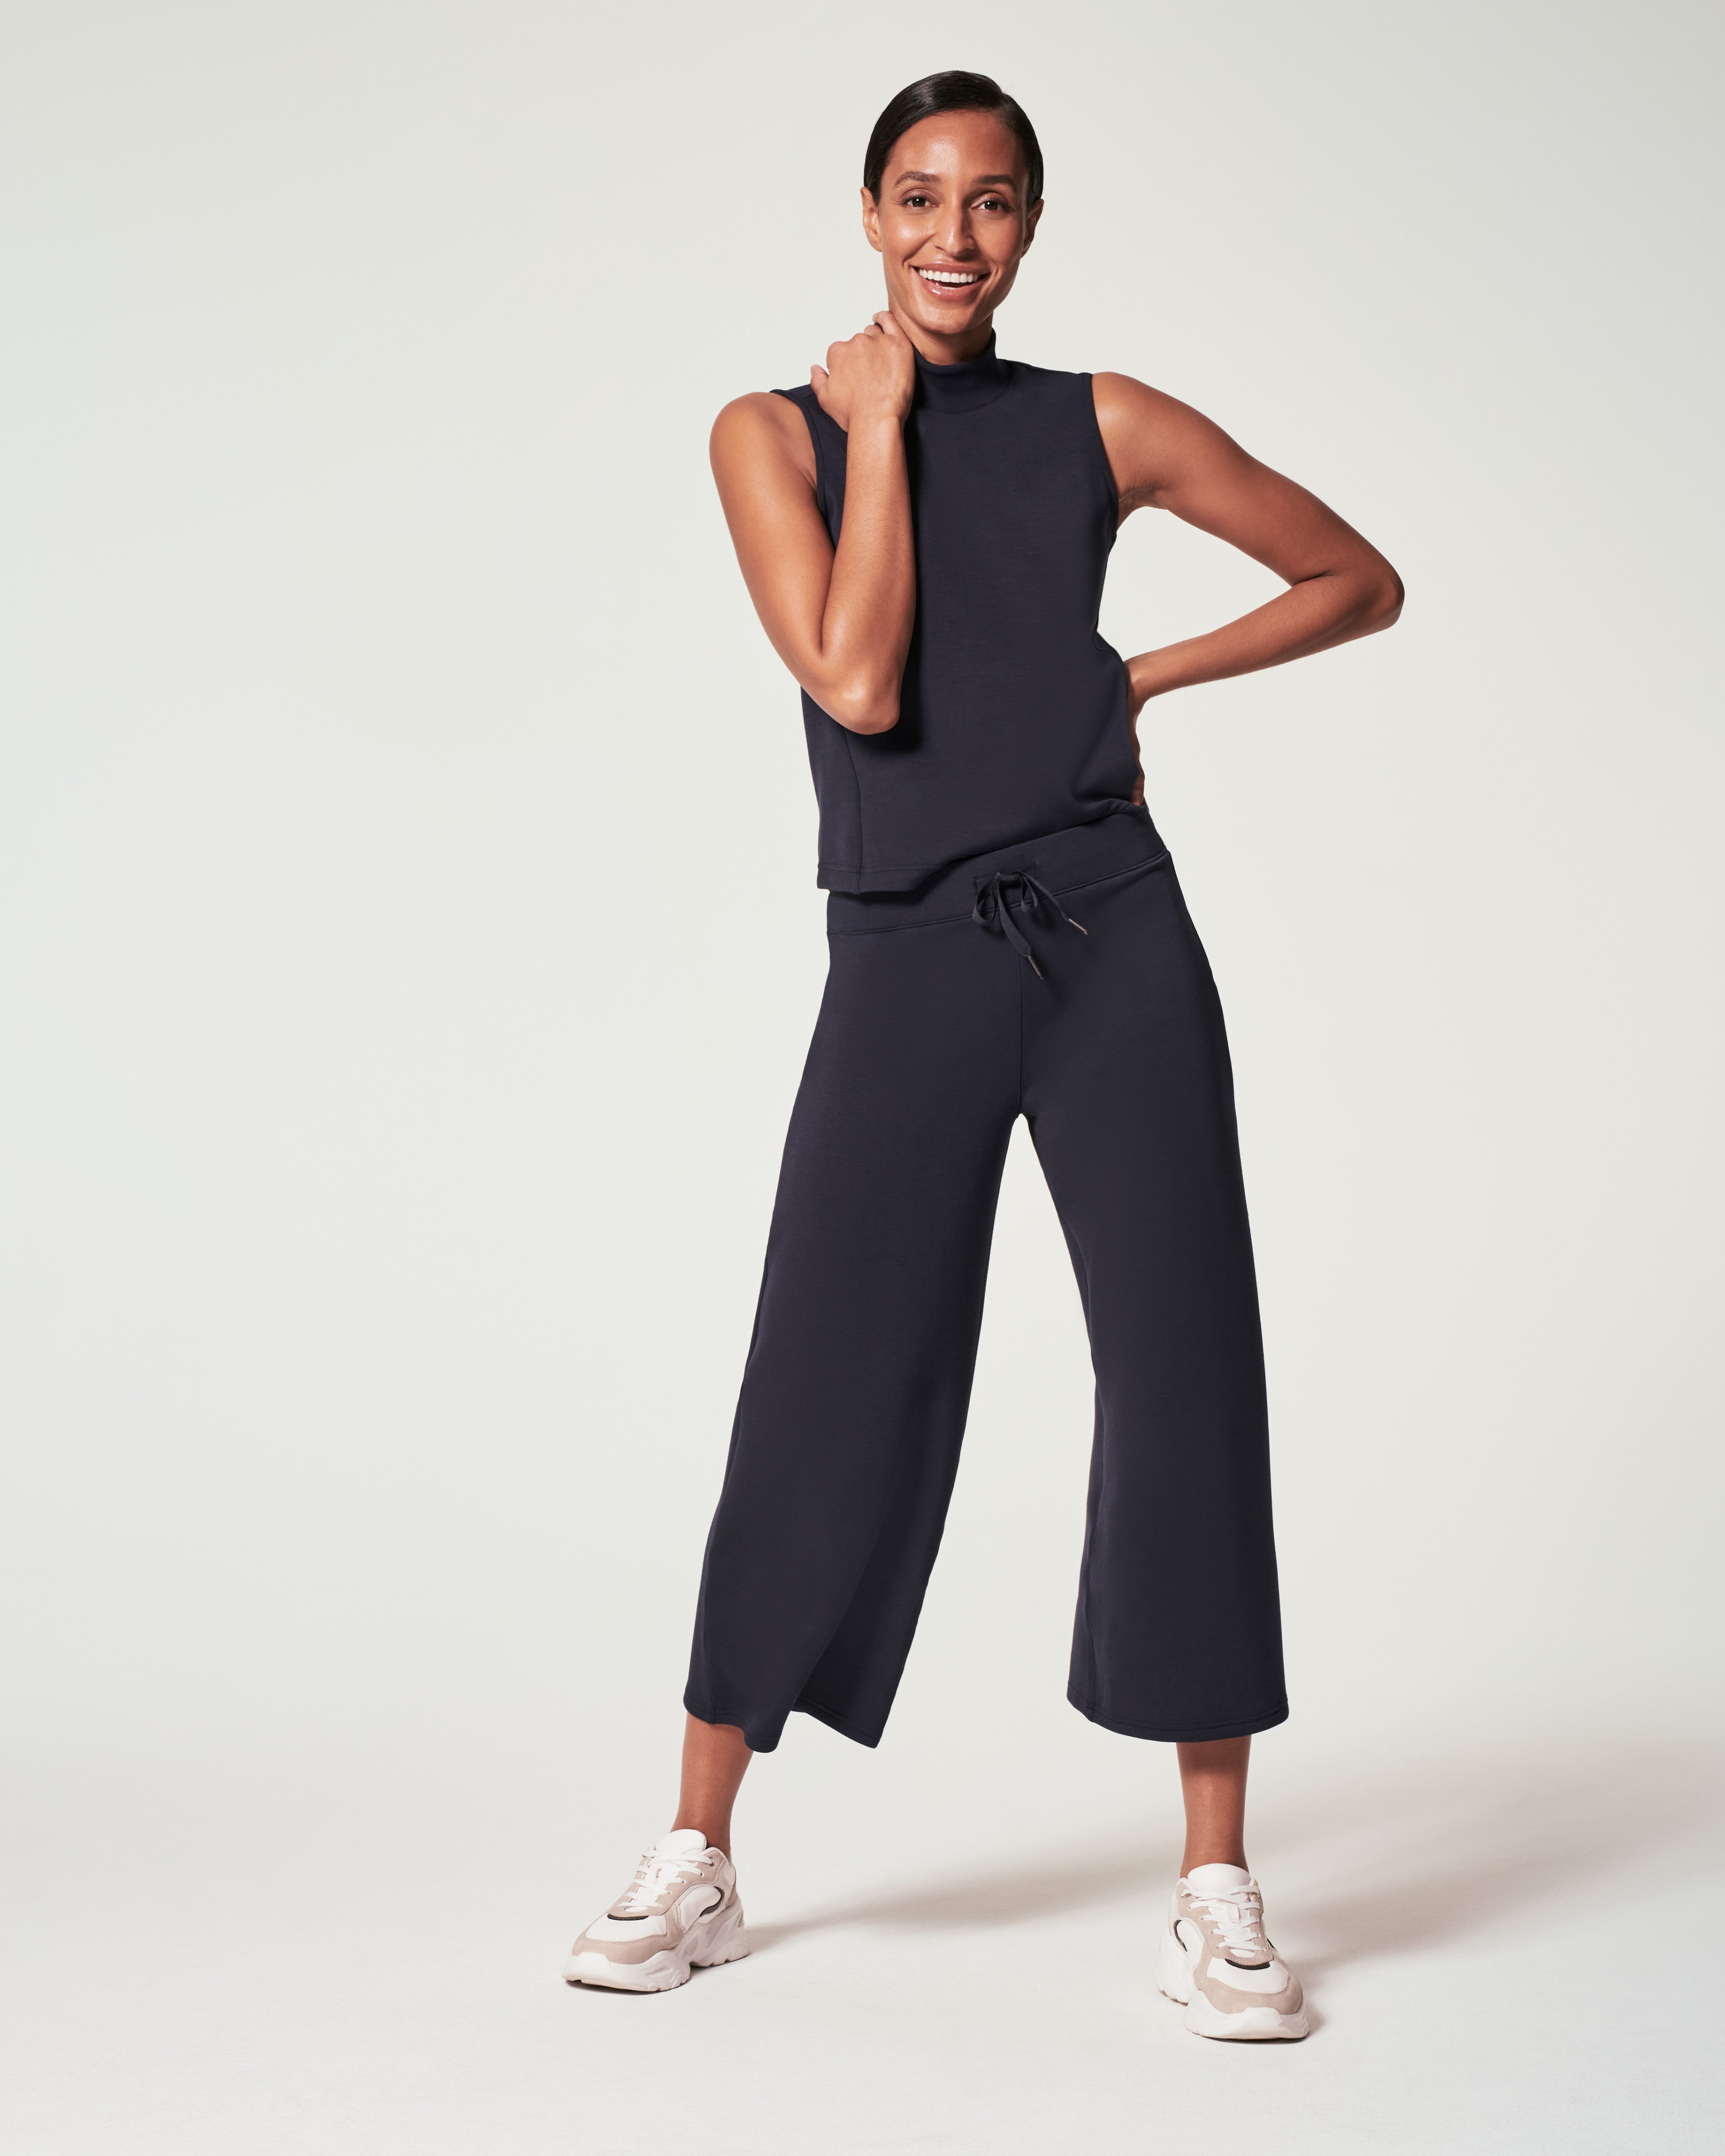 HOW TO STYLE SPANX AIR ESSENTIAL WIDE LEG PANTS // ✨🤍 Spanxs Air Essential  Wide Leg Pants are here and they are so so good! 👏